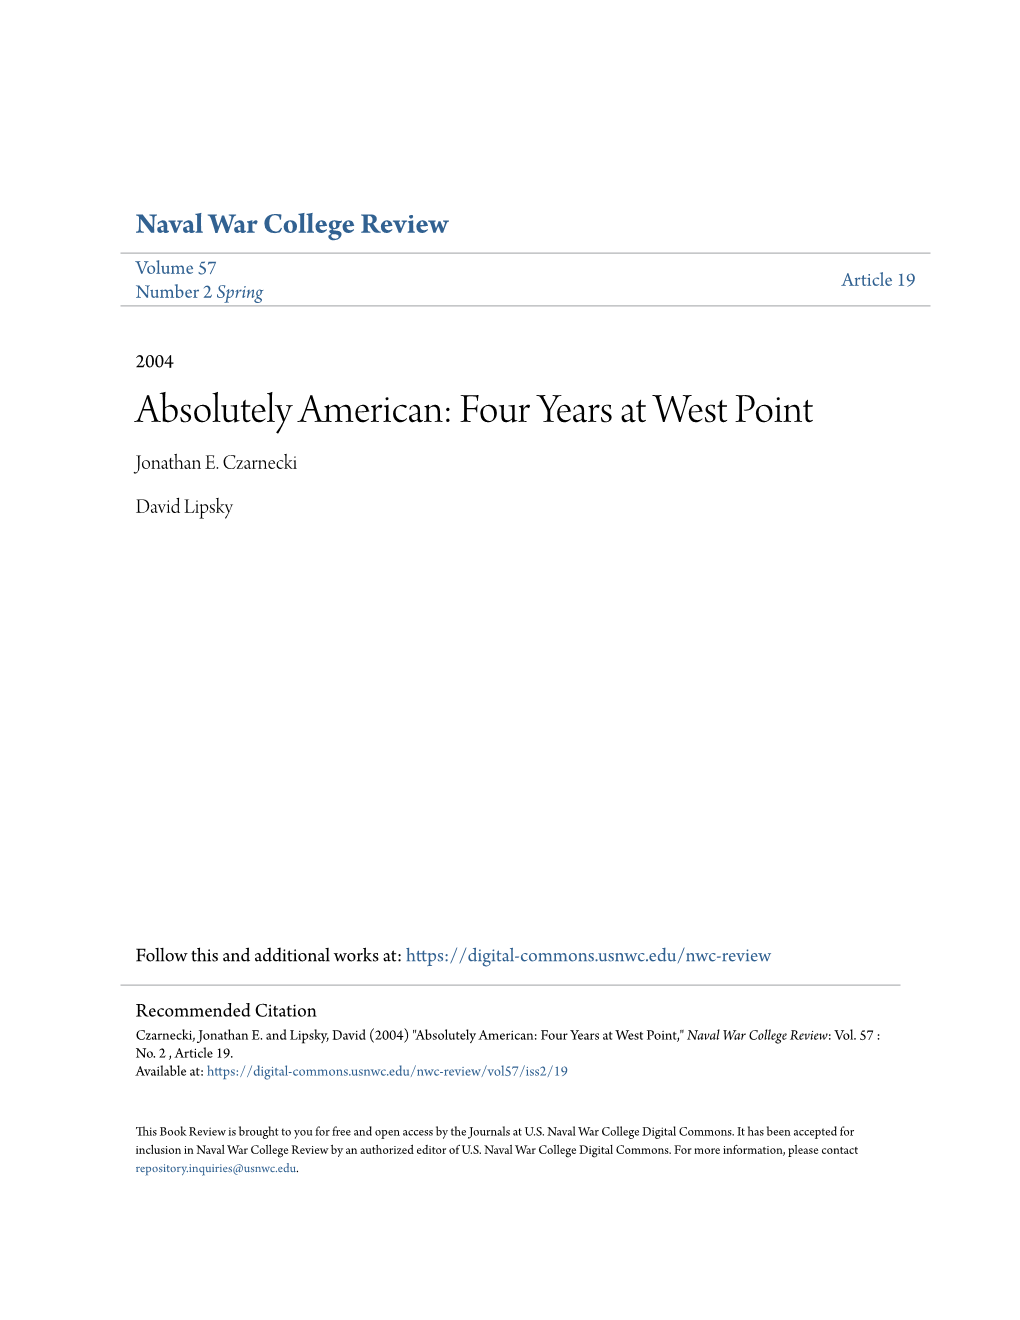 Absolutely American: Four Years at West Point Jonathan E